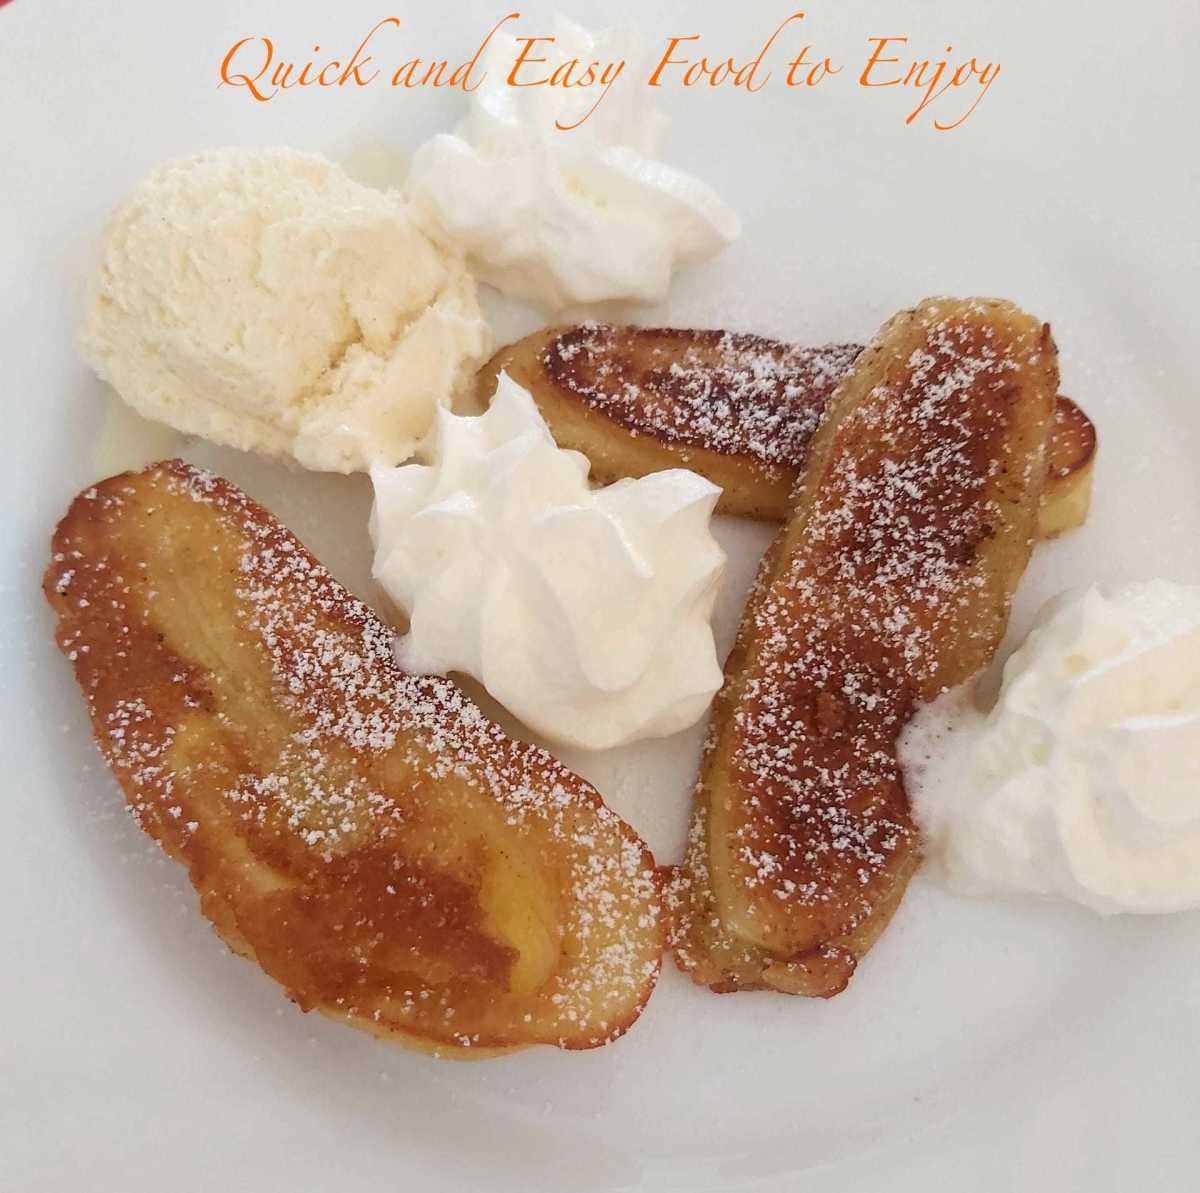 Quick and easy banana fritters.